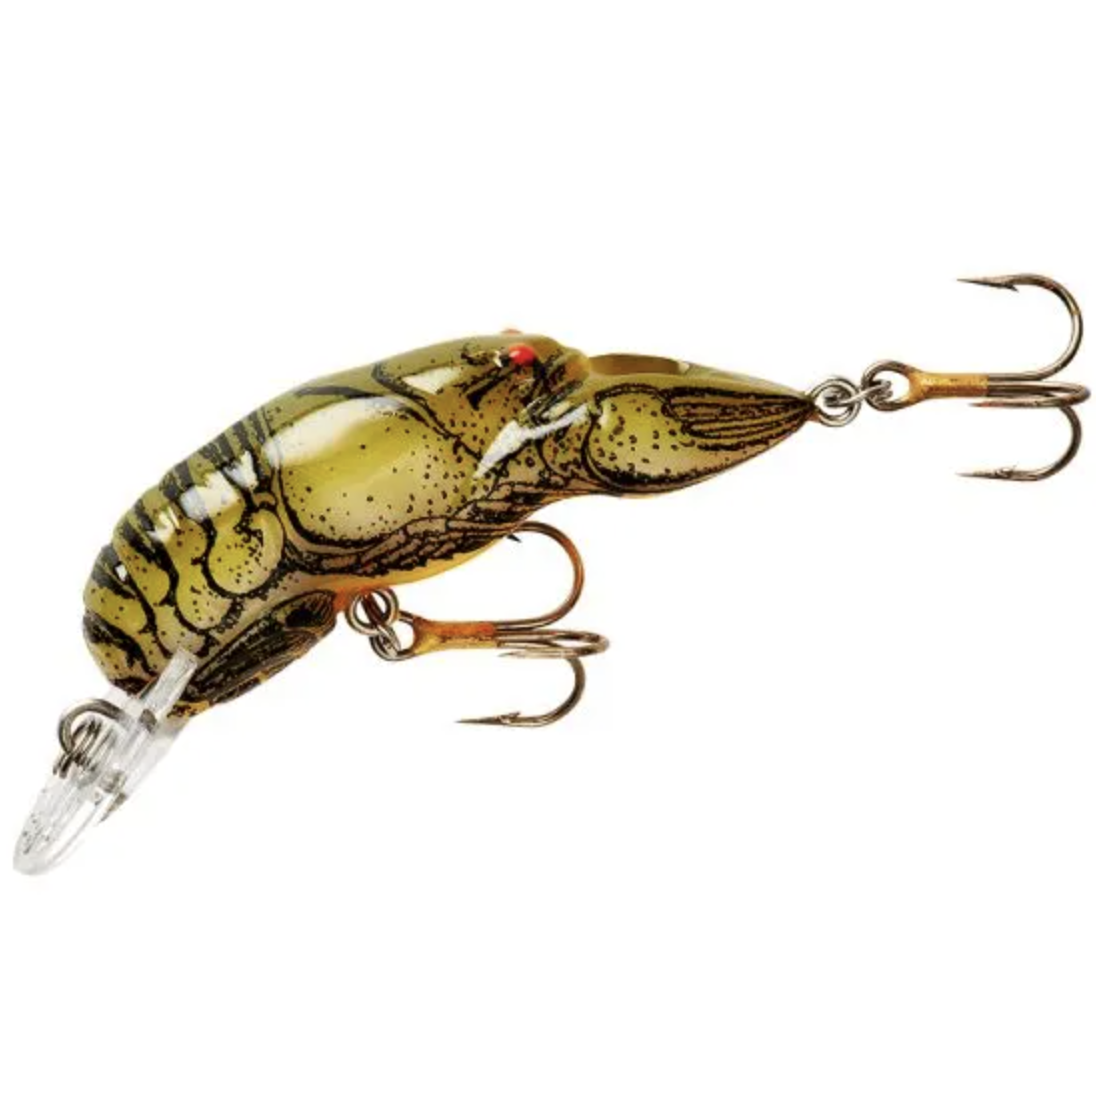 Rebel Middle Wee Craw